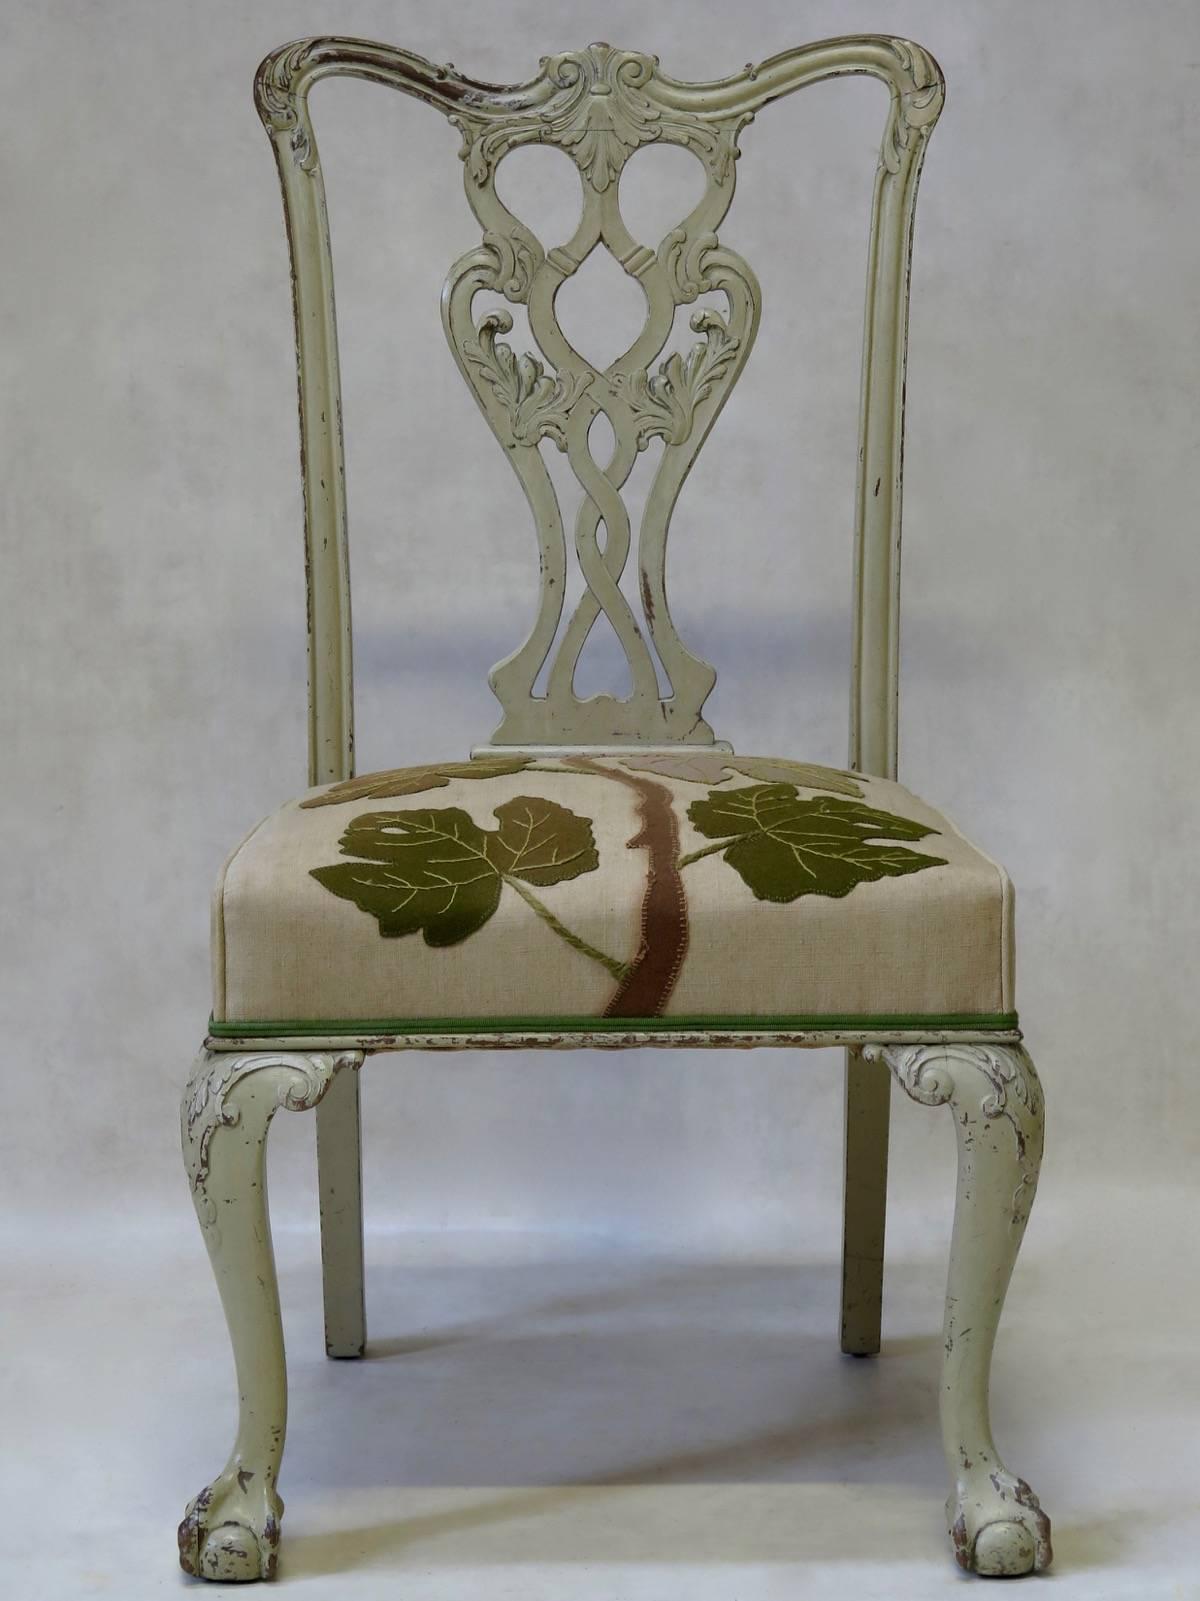 Very lovely, extremely well-built and solid Chippendale style chair, with original, rich, cream-coloured paint. The chair is of generous proportions, with an elegant back splat, exaggerated, carved knees, and massive claw and ball feet. The seat has